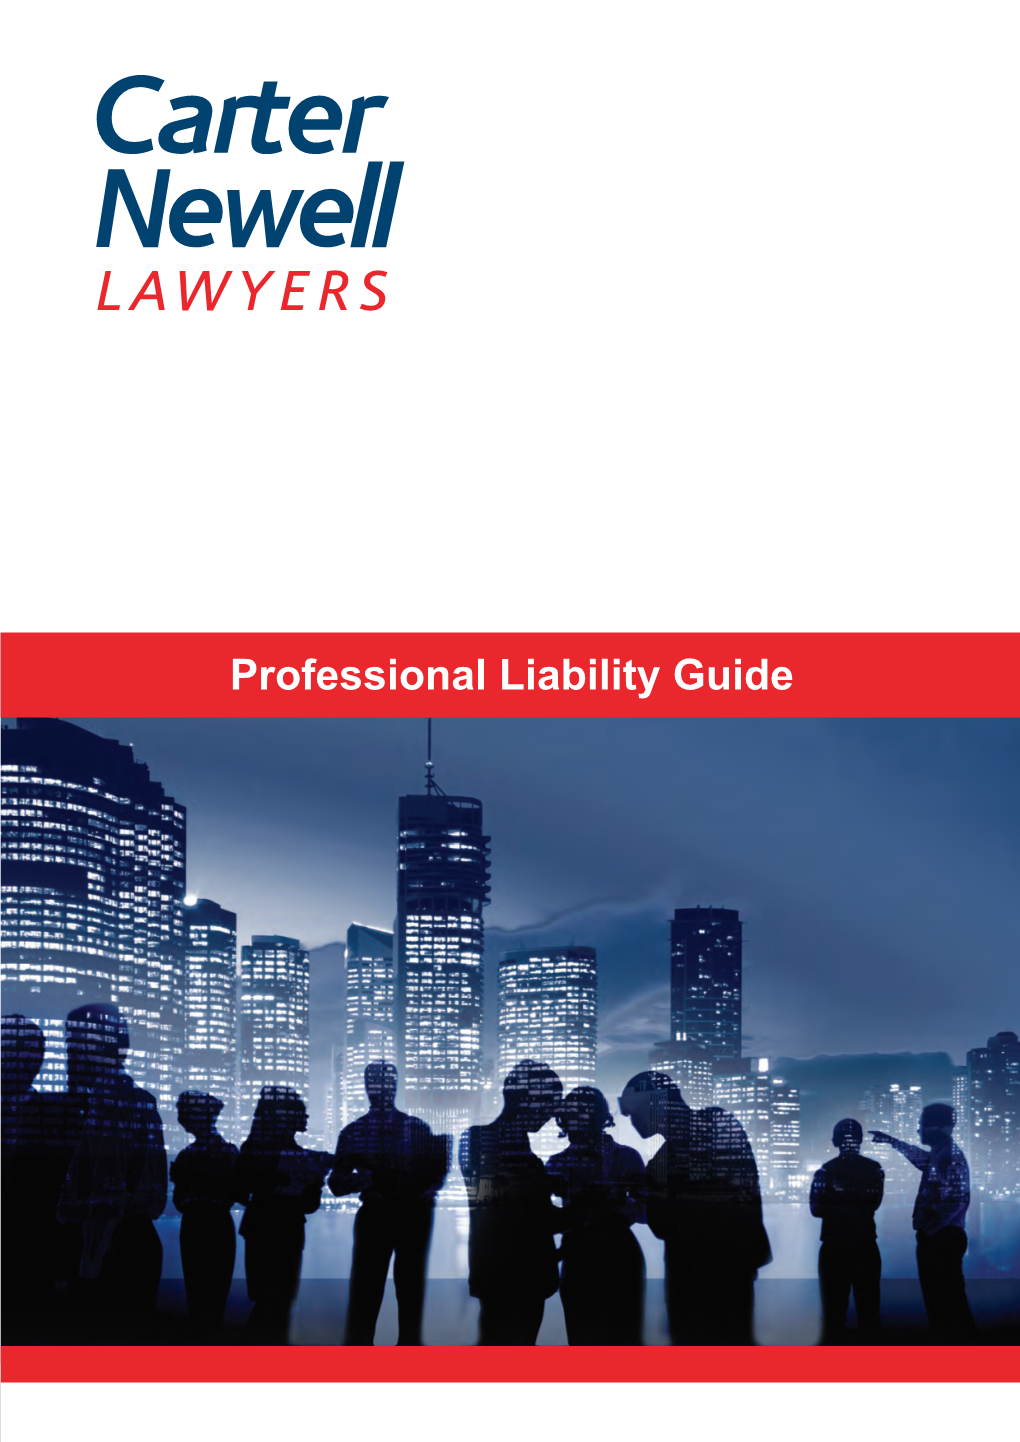 Professional Liability Guide 1St Edition PDF 1.03 MB